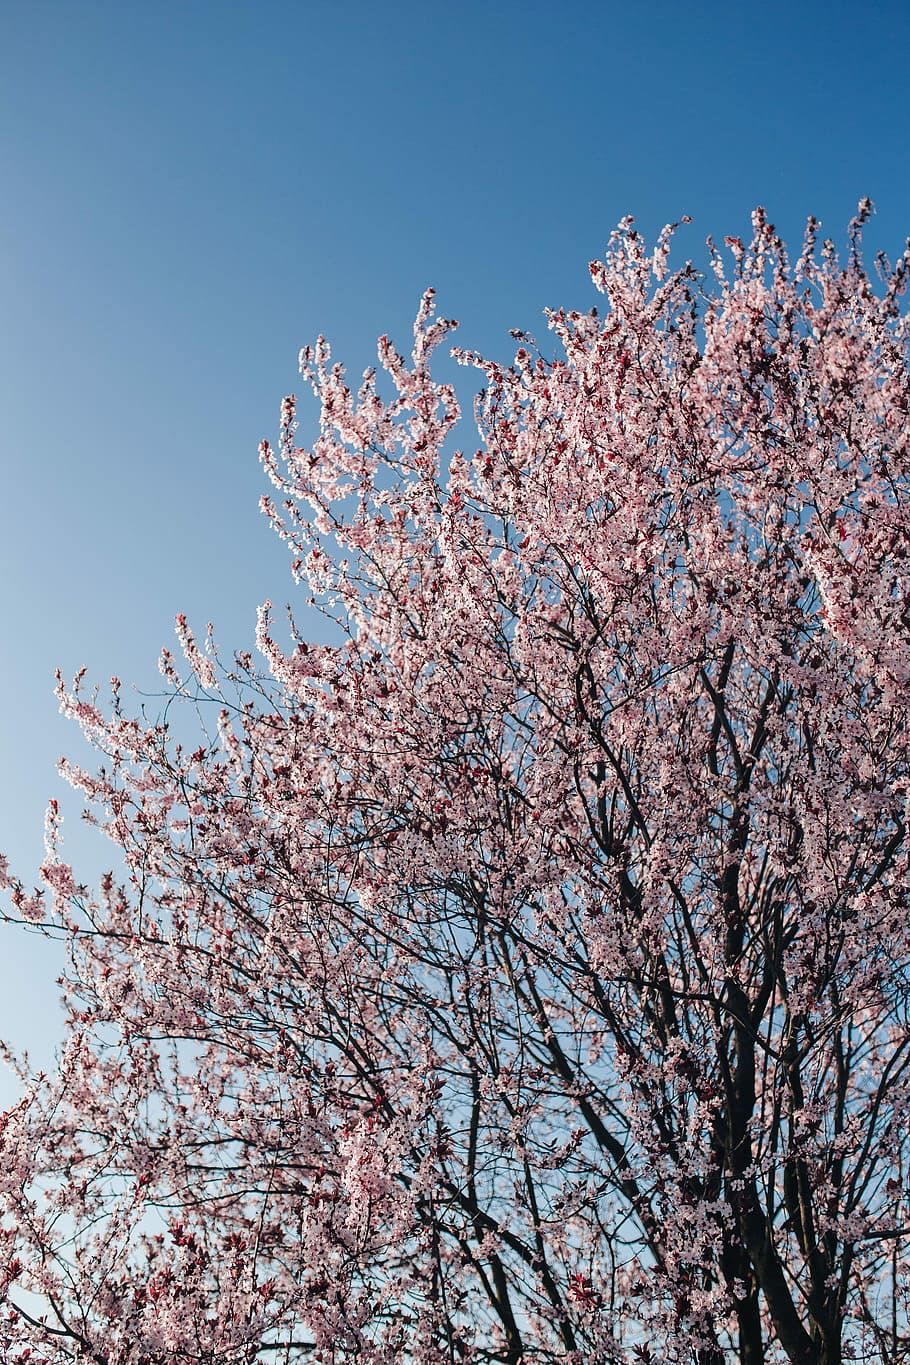 pink spring flowers, Pink, spring flowers, flowers, flora, blue sky, blooming, spring, blossom, twig